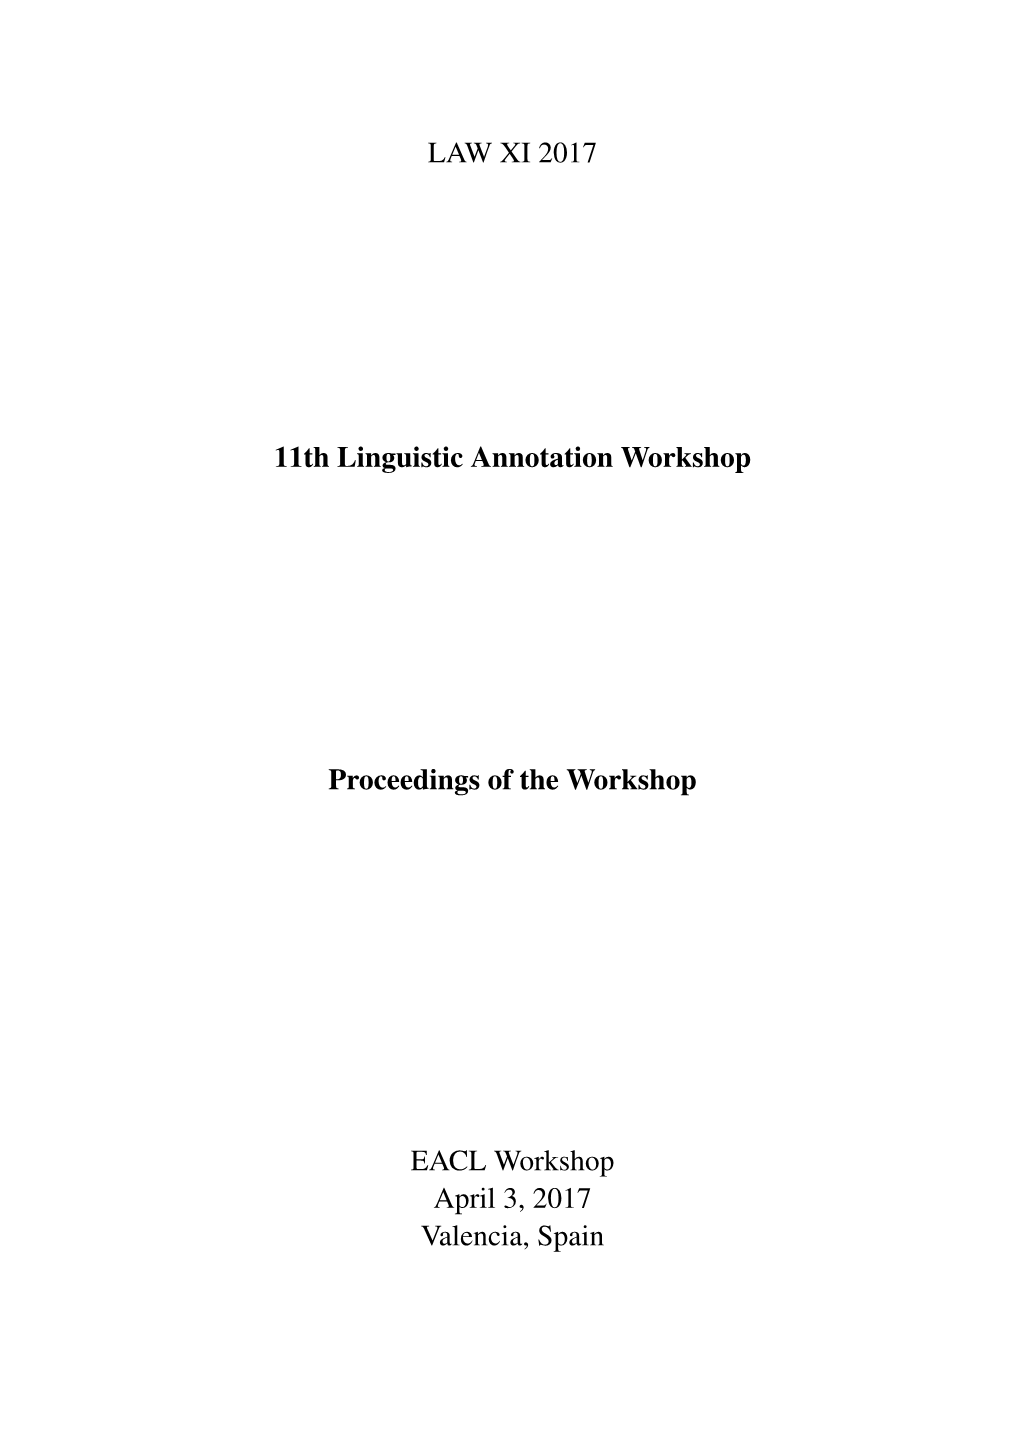 Proceedings of the 11Th Linguistic Annotation Workshop, Pages 1–12, Valencia, Spain, April 3, 2017